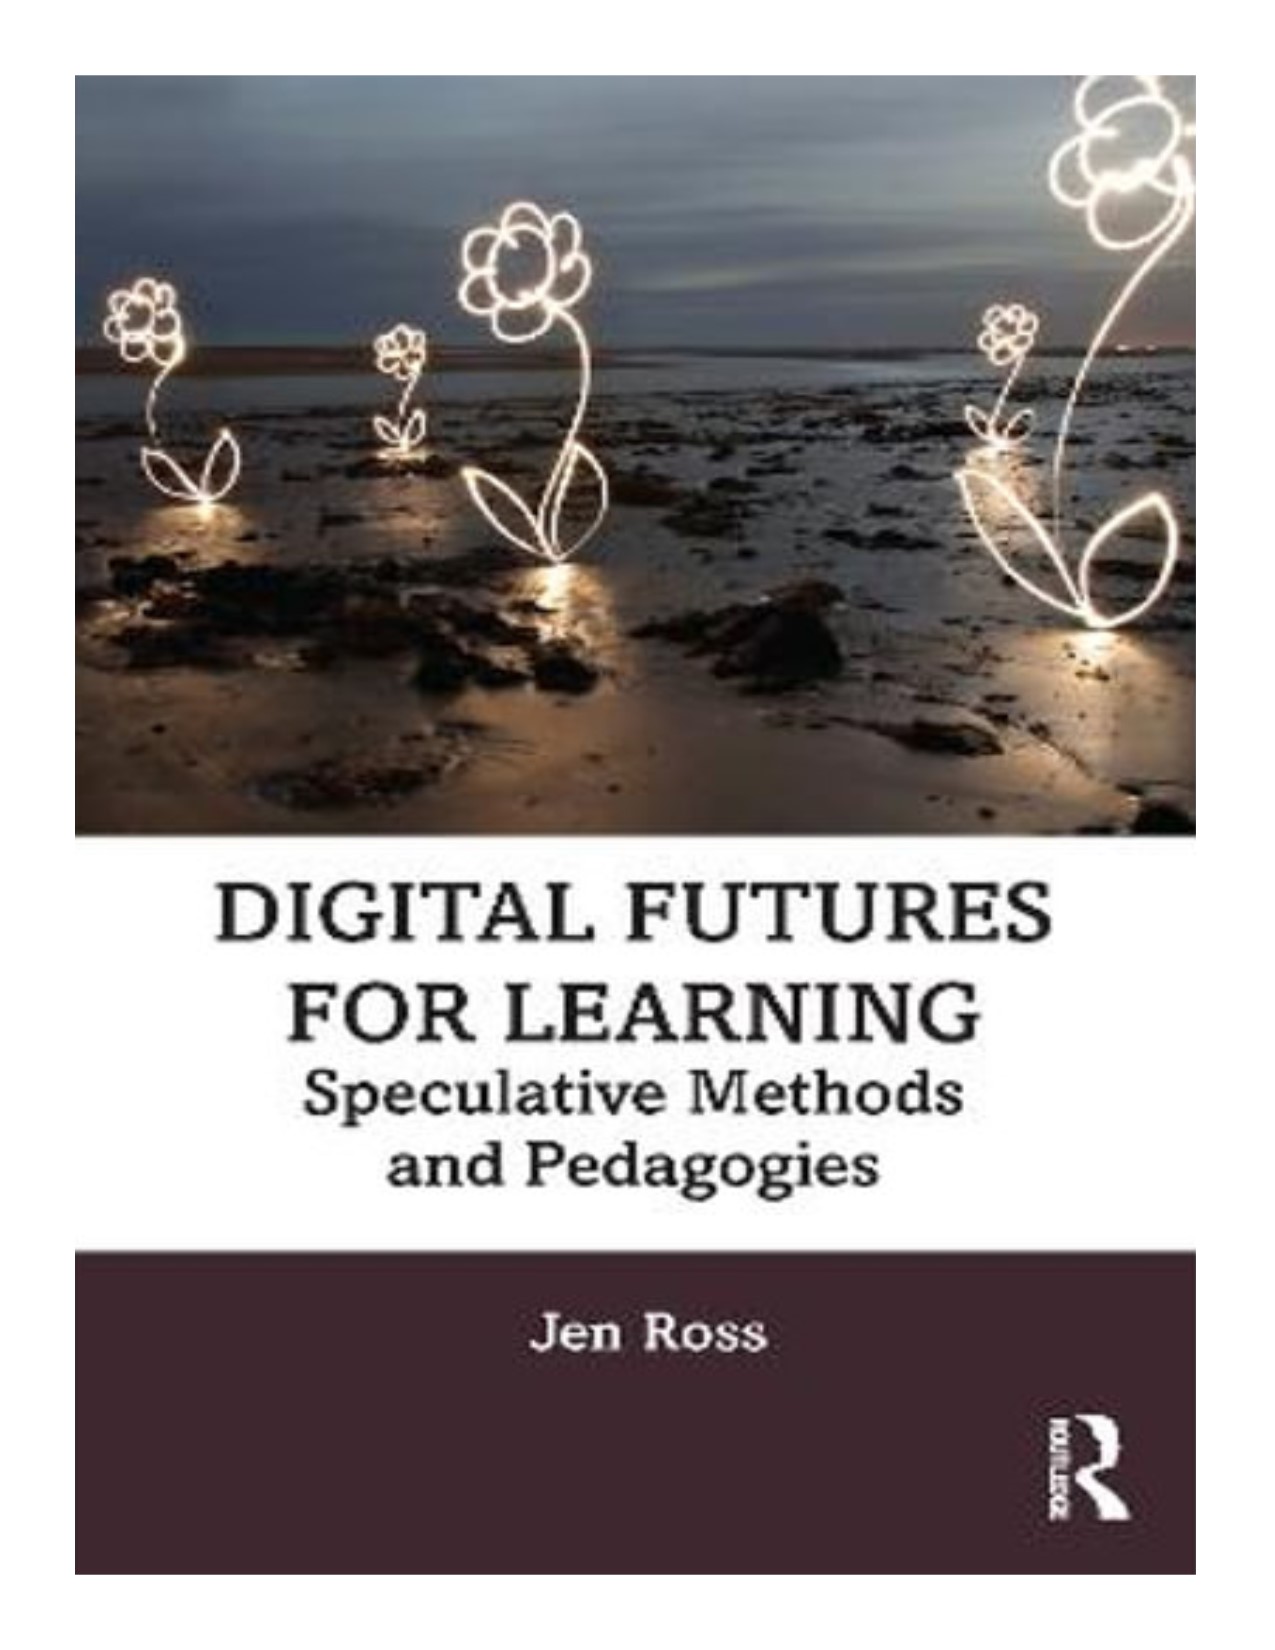 Digital futures for learning speculative methods and pedagogies